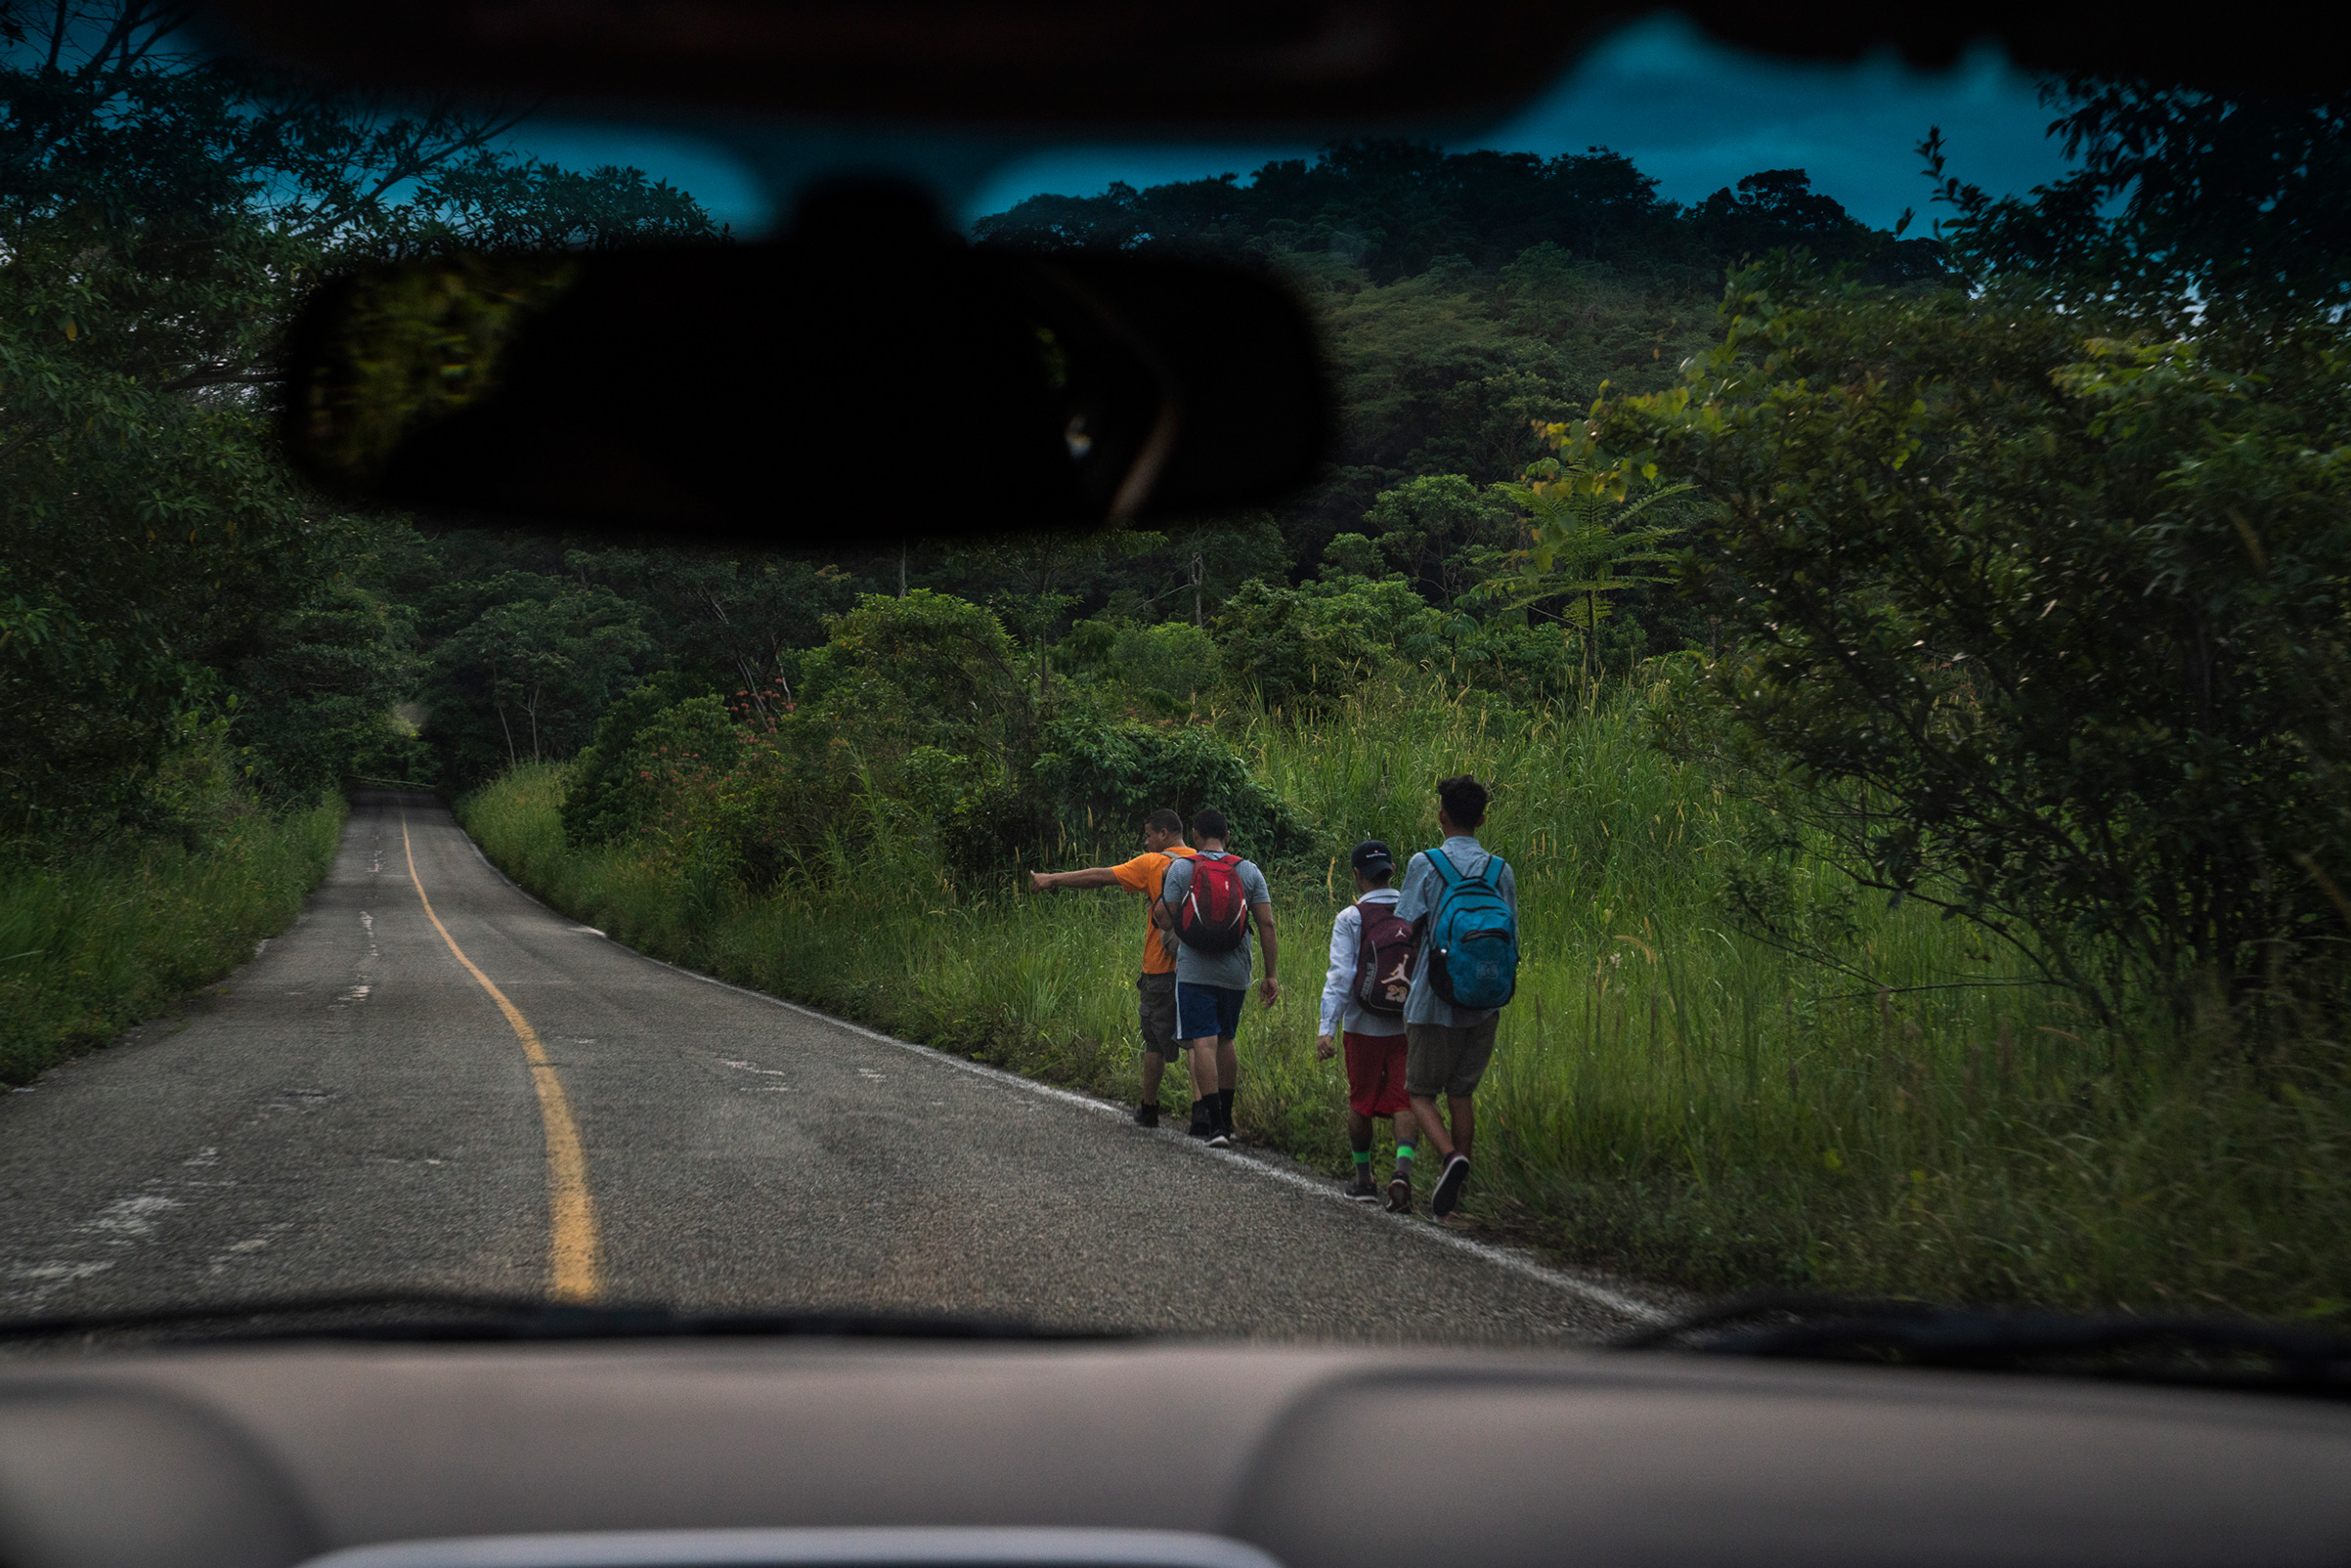 Migrants walk along a highway near Palenque, Chiapas, on Oct. 21. The highway is known by locals as “El Gran Corredor del Pacífico del Migrante,” or “The Great Pacific Corridor of the Migrant." This is a common route for Honduran migrants. (Veronica G. Cardenas)